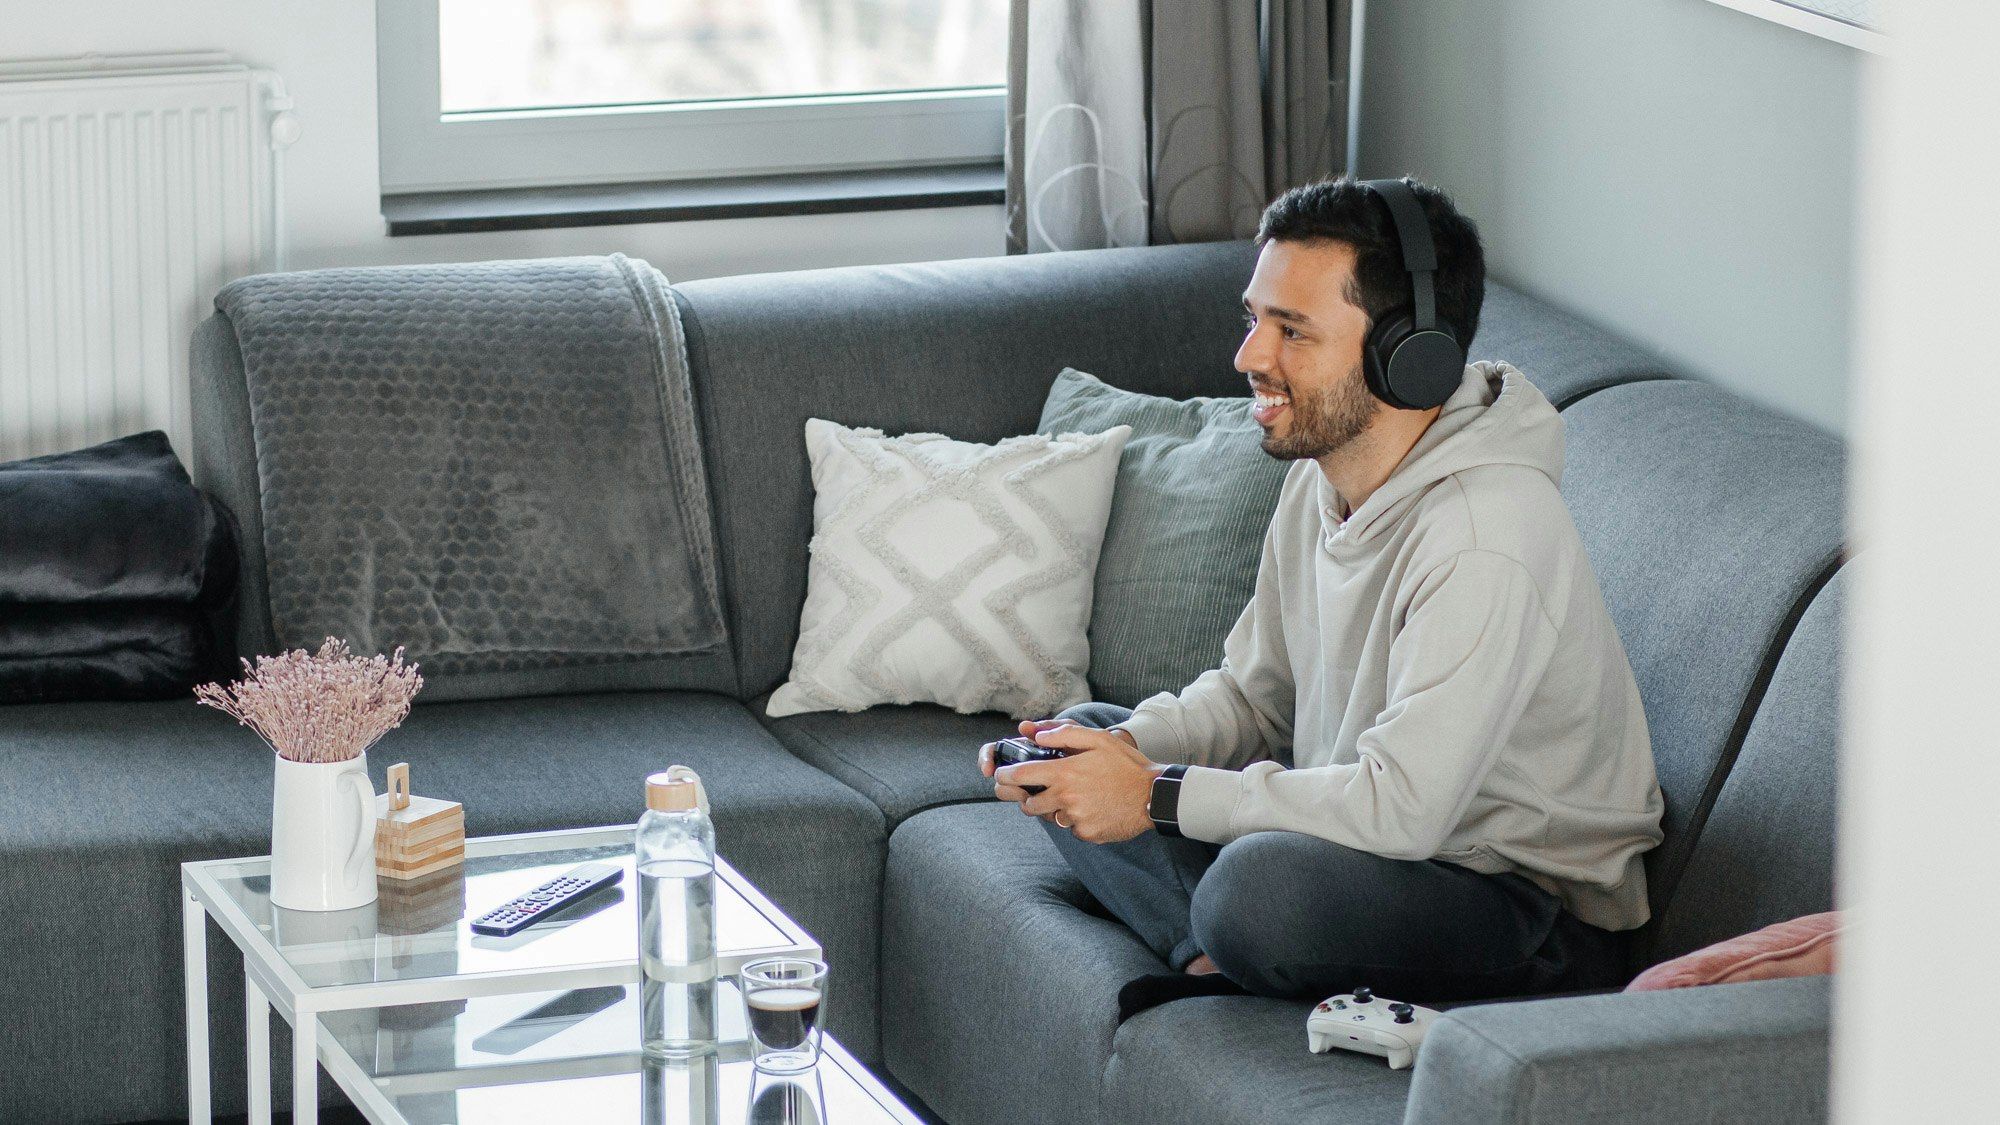 Felipe on a couch, with a headset and holding a controller in his hands